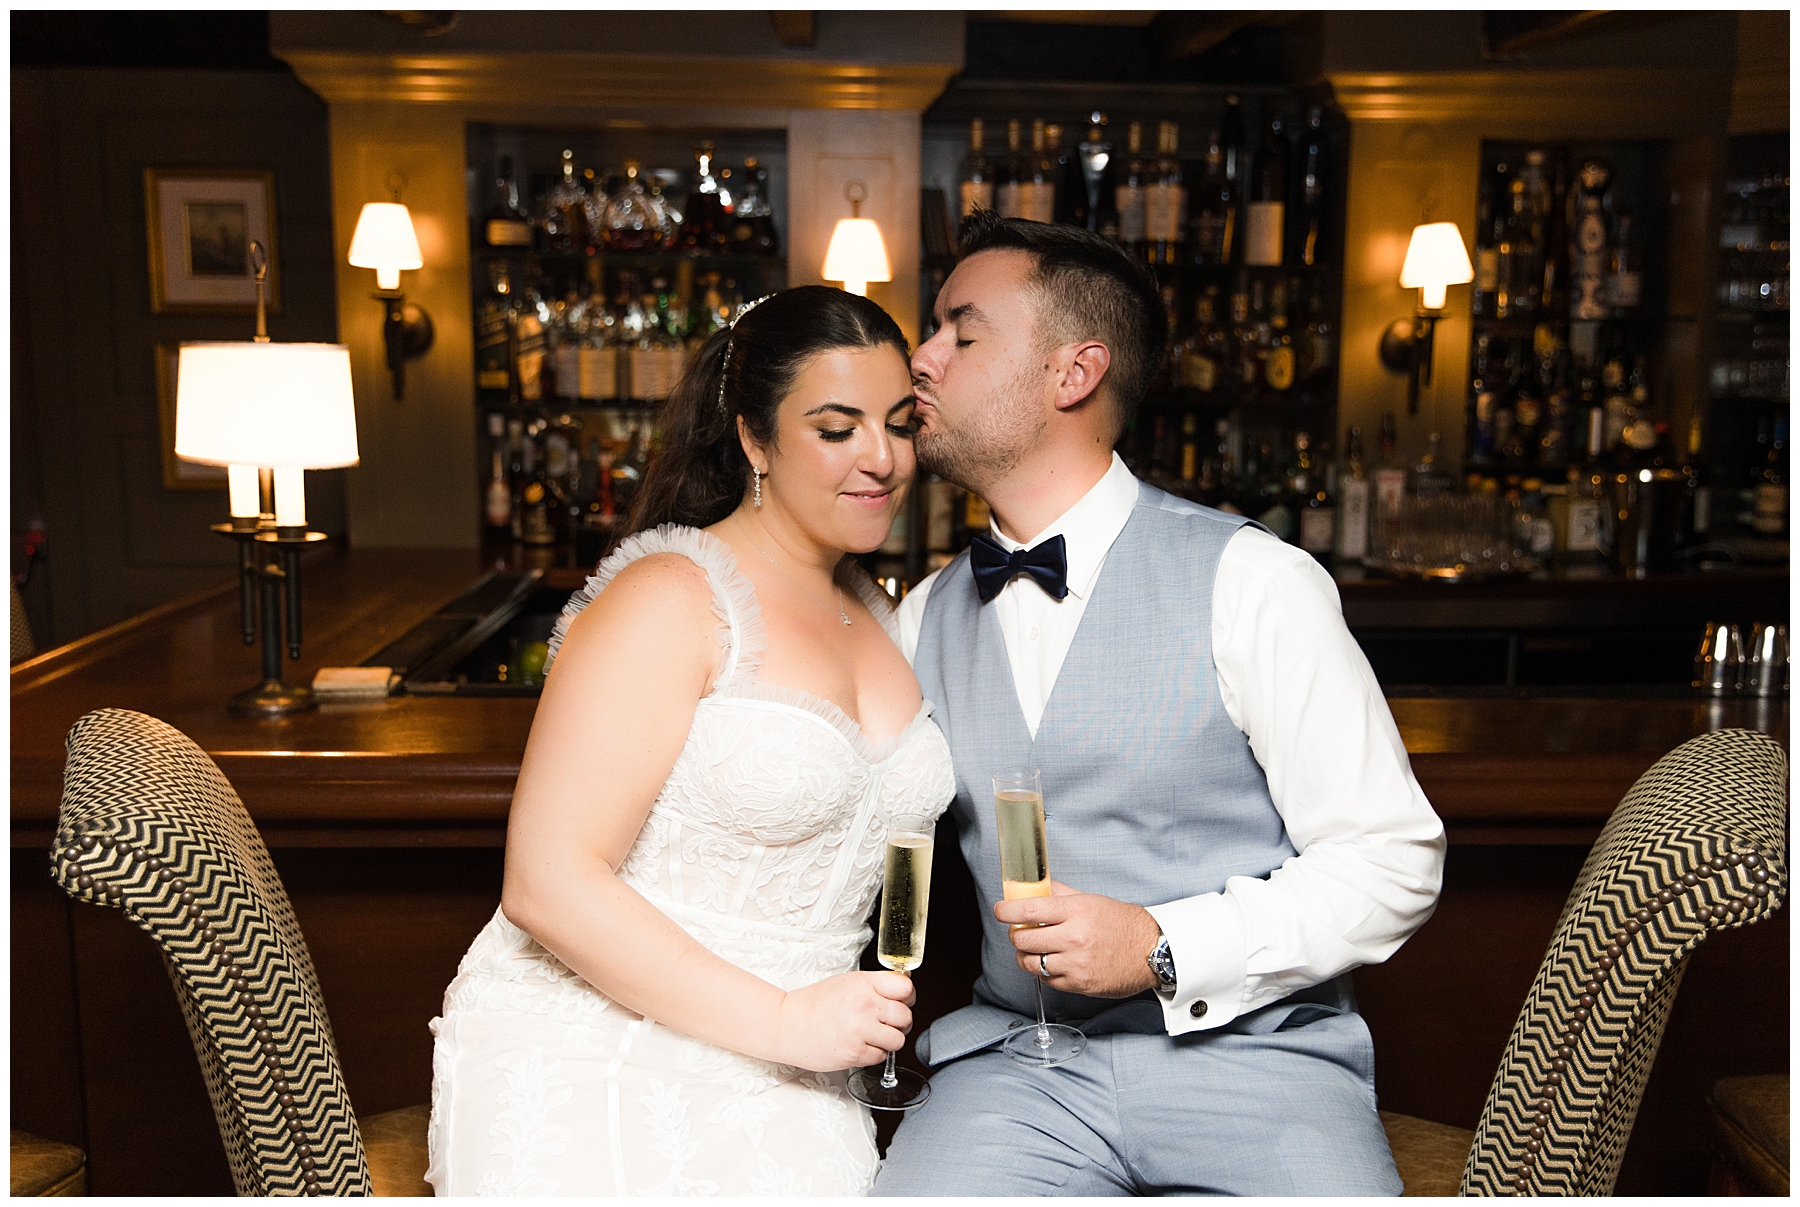 newlyweds share glass of champagne at the end of wedding day